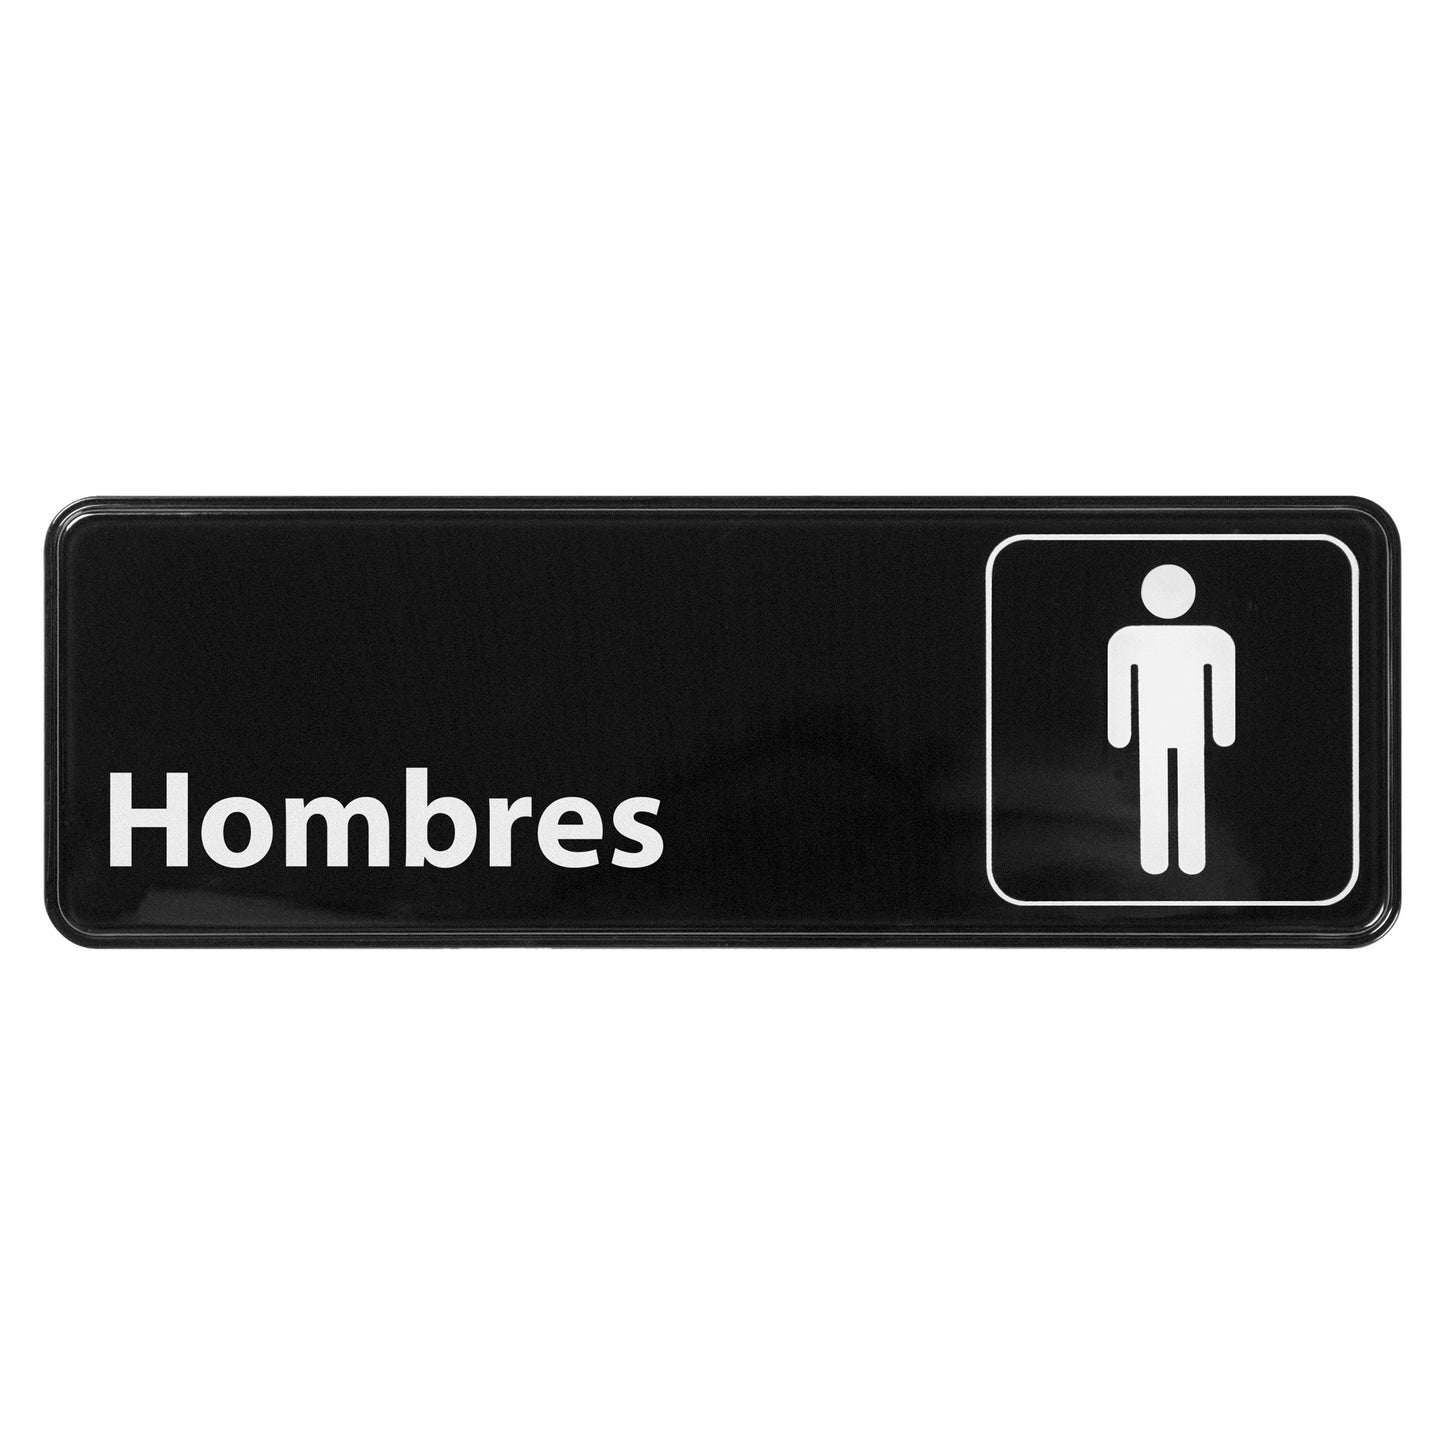 SGN-368 - Information Signs, 9"W x 3"H, Spanish - SGN-368 - Men